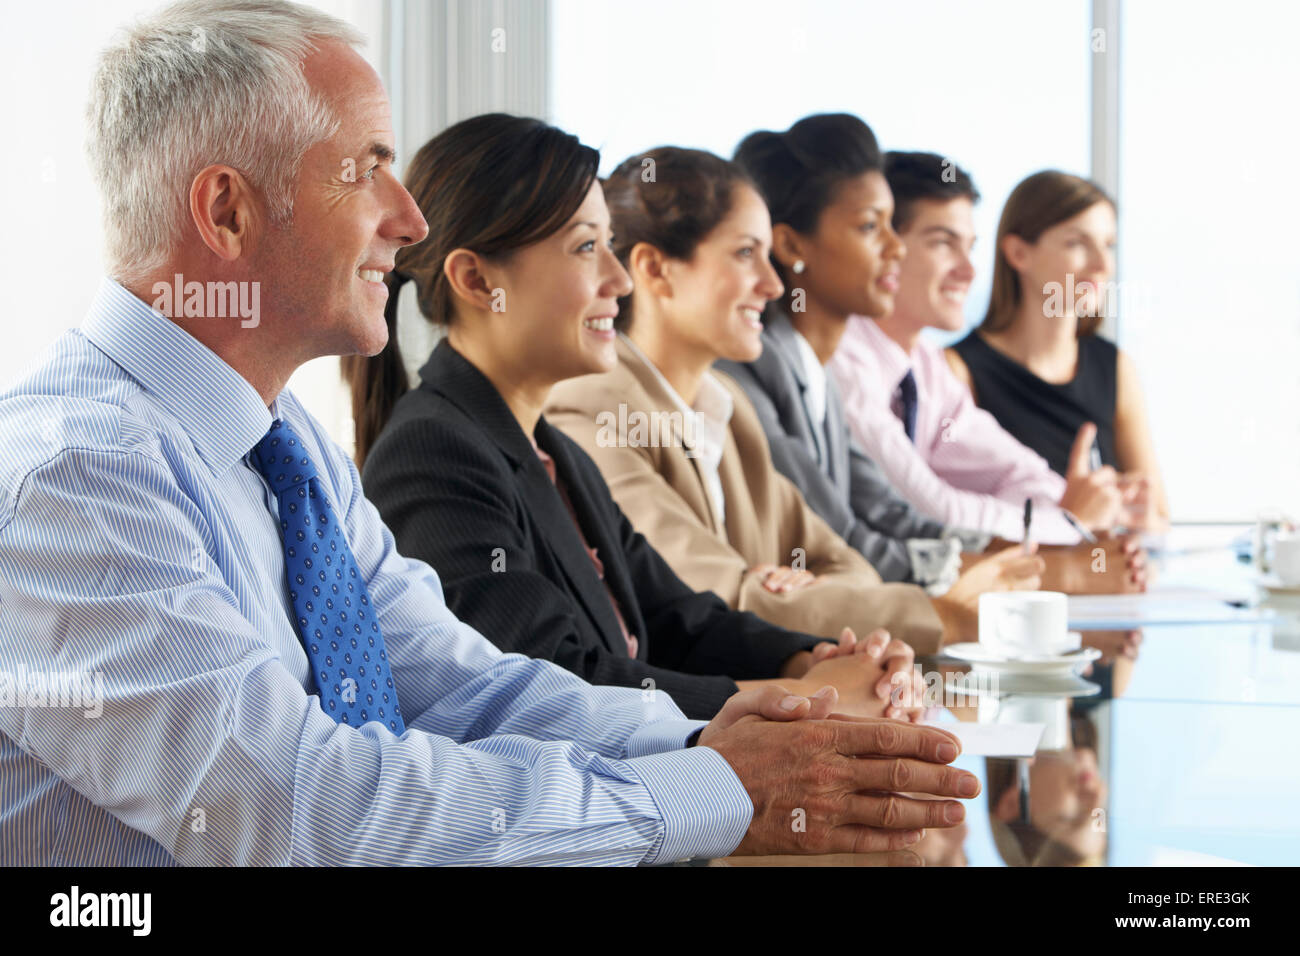 Line Of Business People Listening To Presentation Seated At Glass Boardroom Table Stock Photo